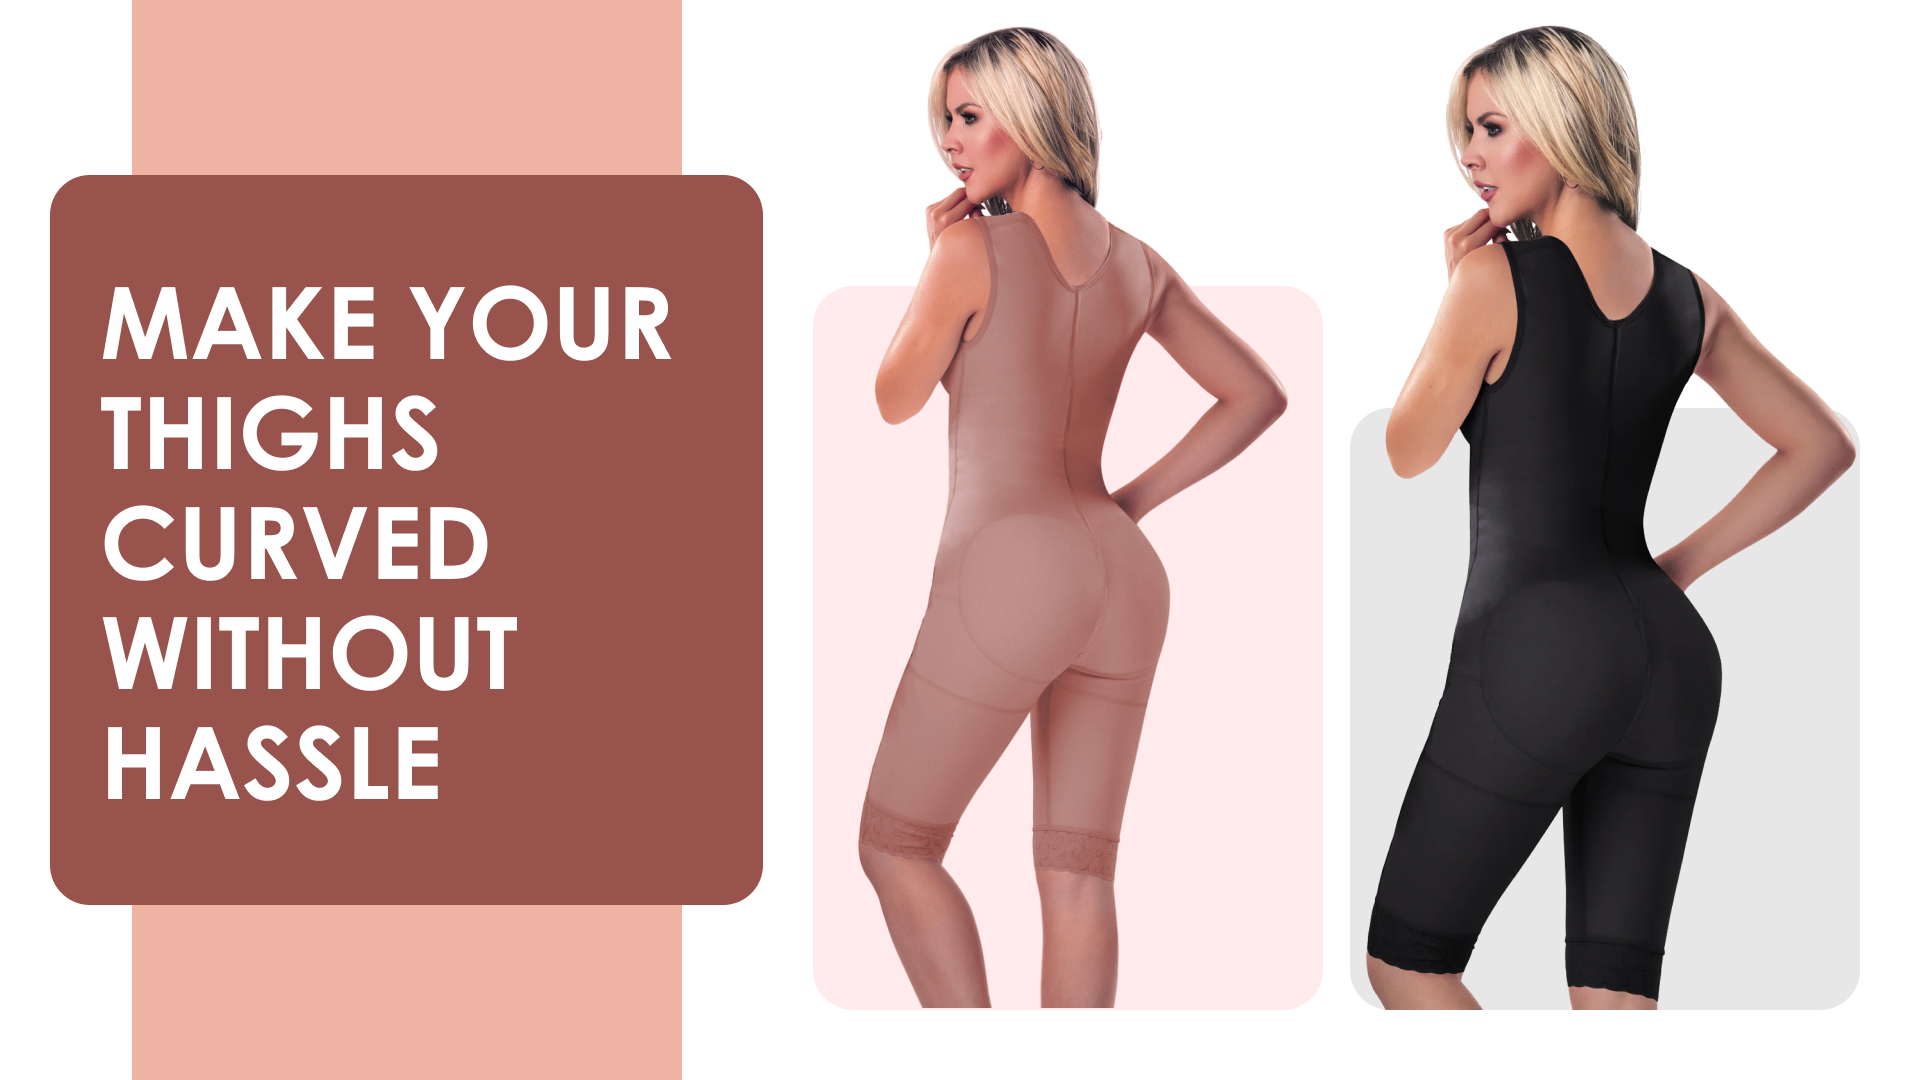 Make your thighs curved without hassle